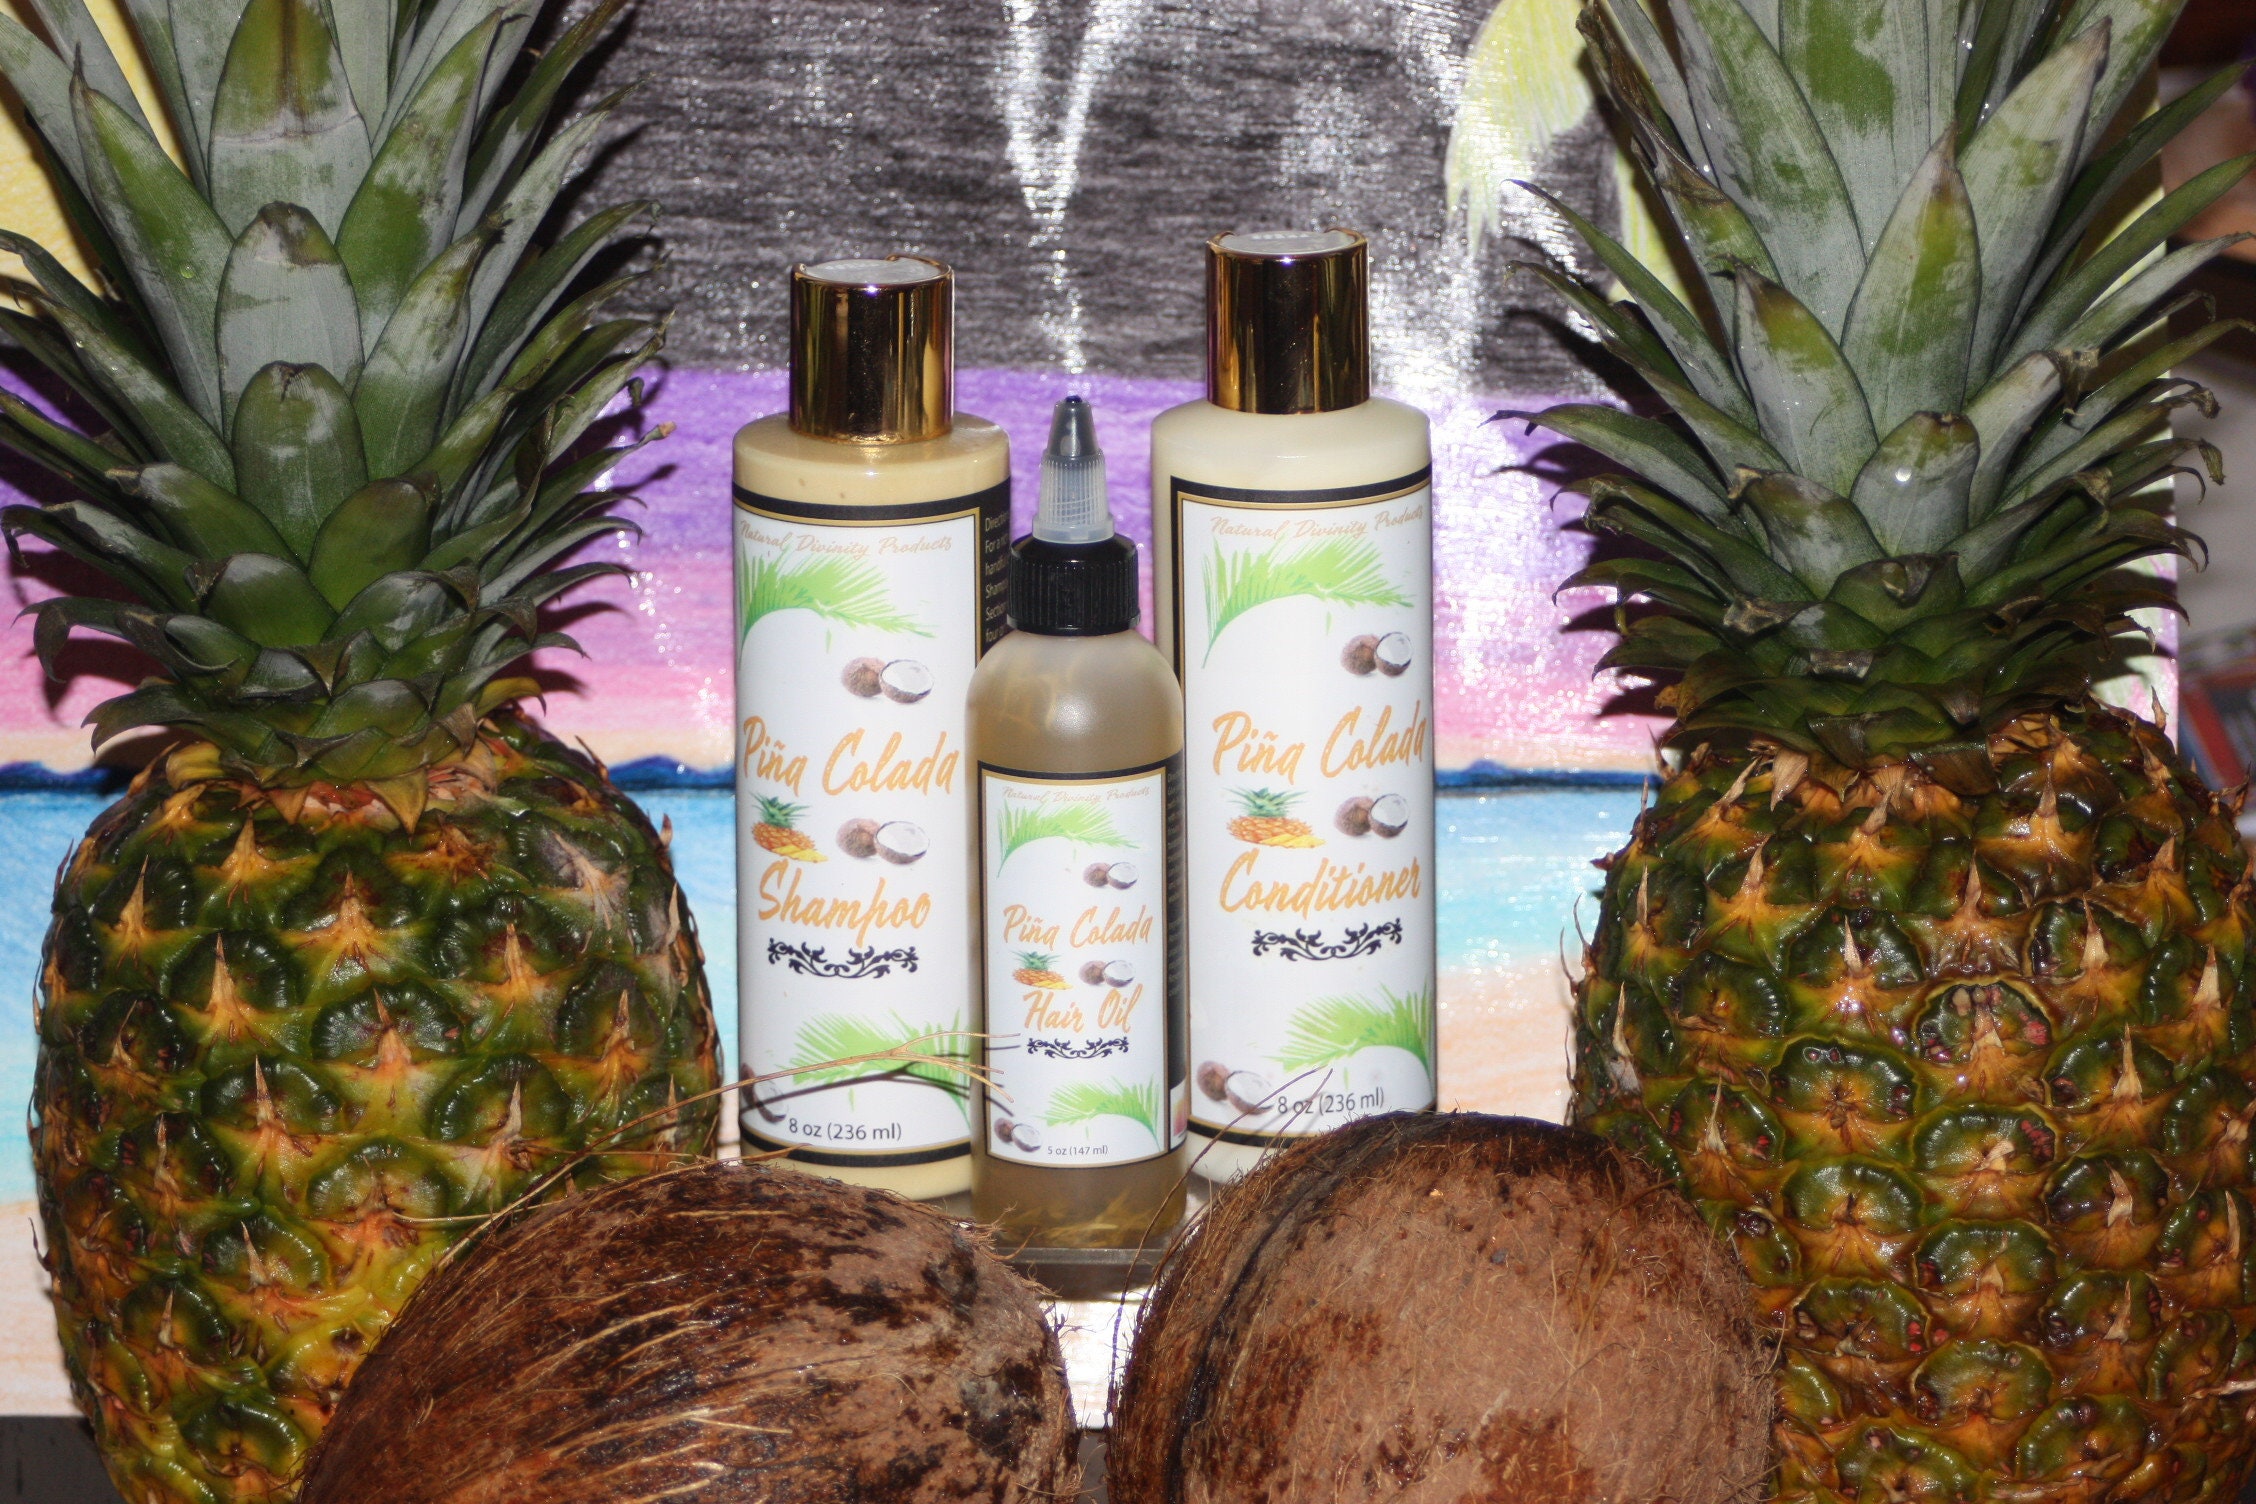 P&J Fragrance Oil Beach Set | Ocean Breeze, Papaya, Pina Colada, Mango,  Pineapple, and Night Air Candle Scents for Candle Making, Freshie Scents,  Soap